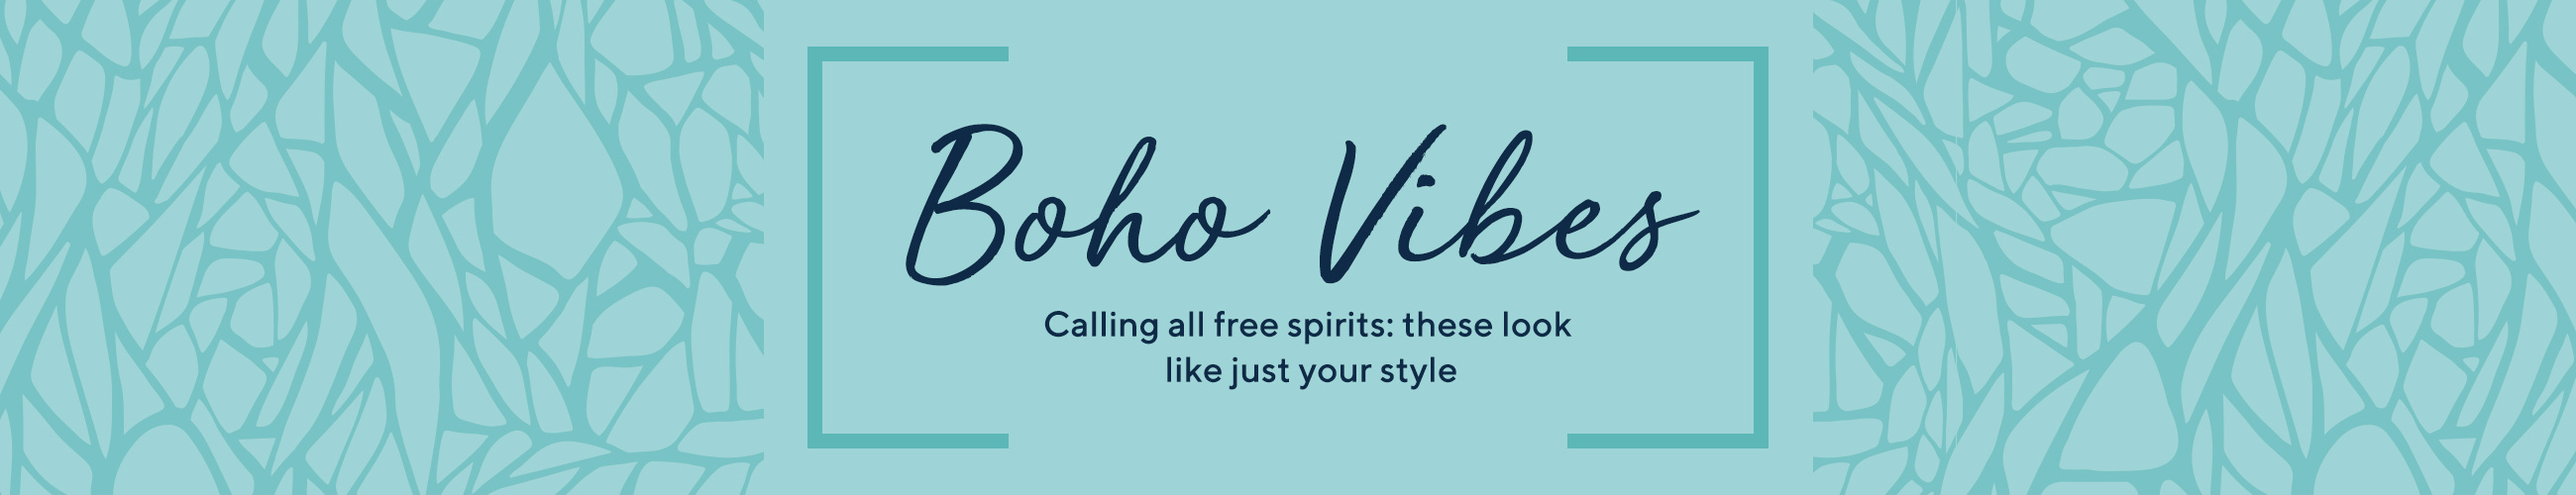 Boho Vibes   Calling all free spirits: these look like just your style